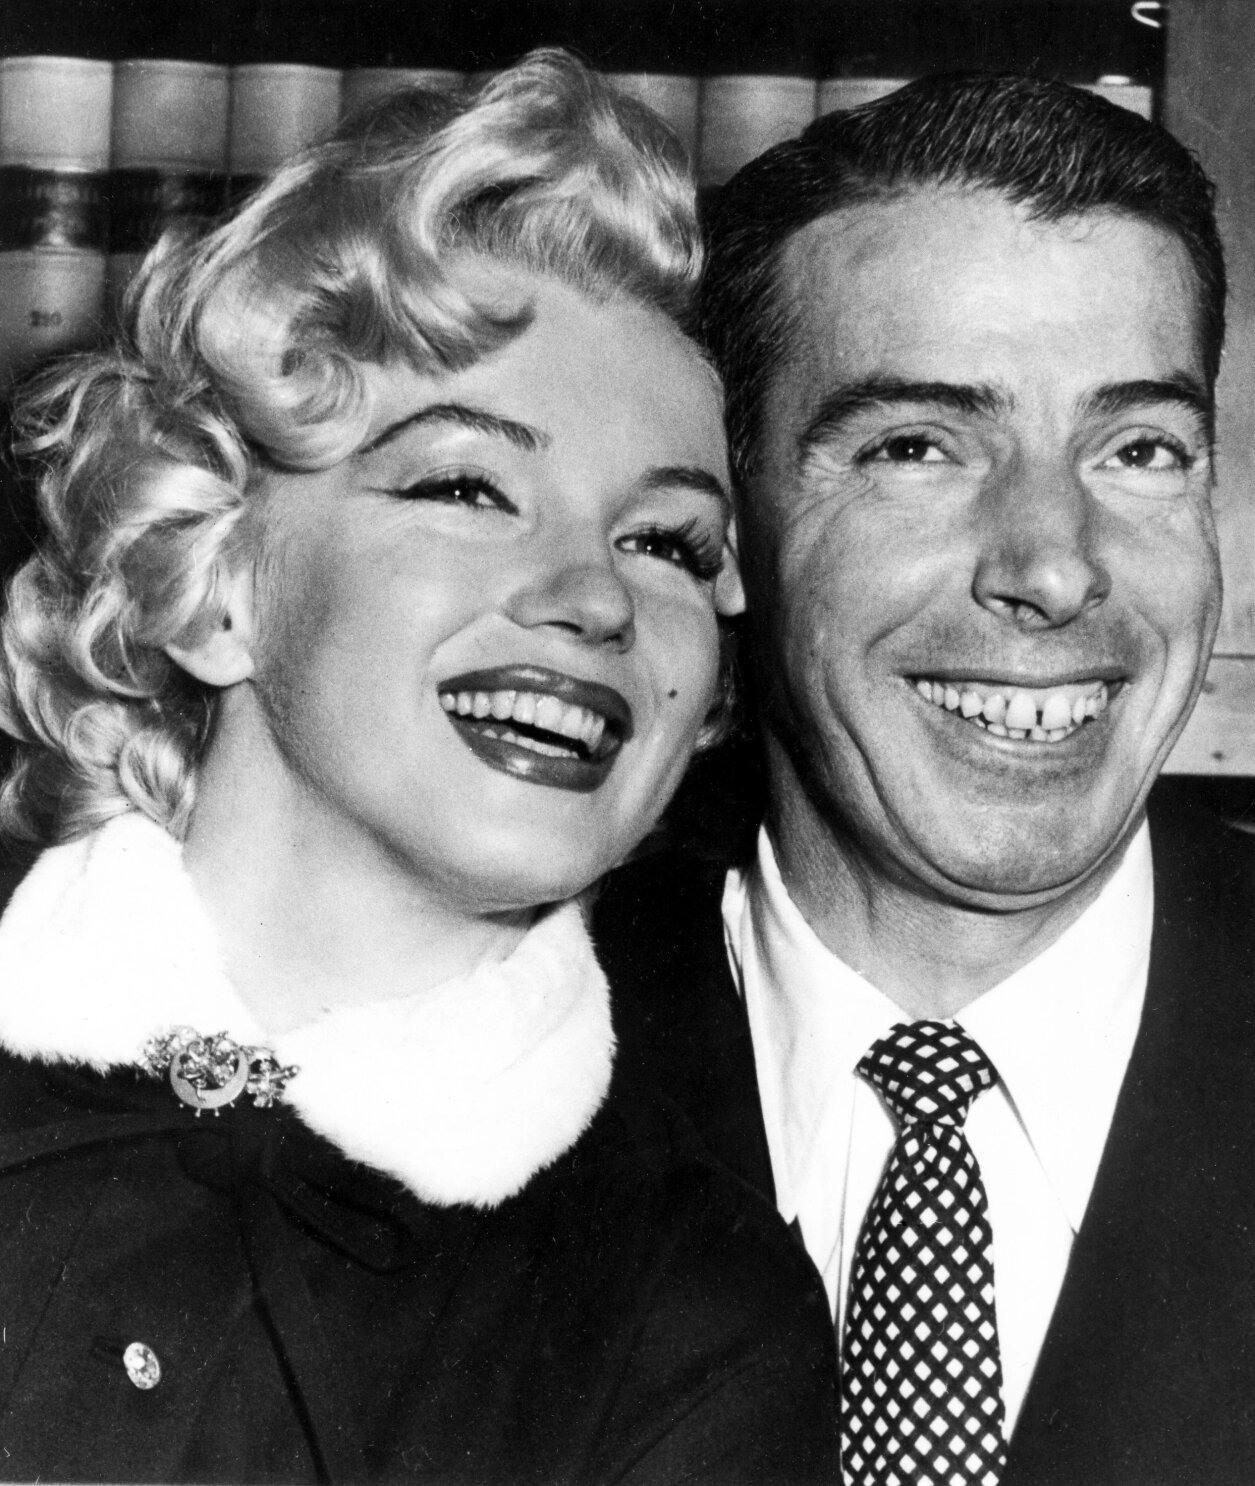 Dress Monroe wore to announce DiMaggio split to be auctioned